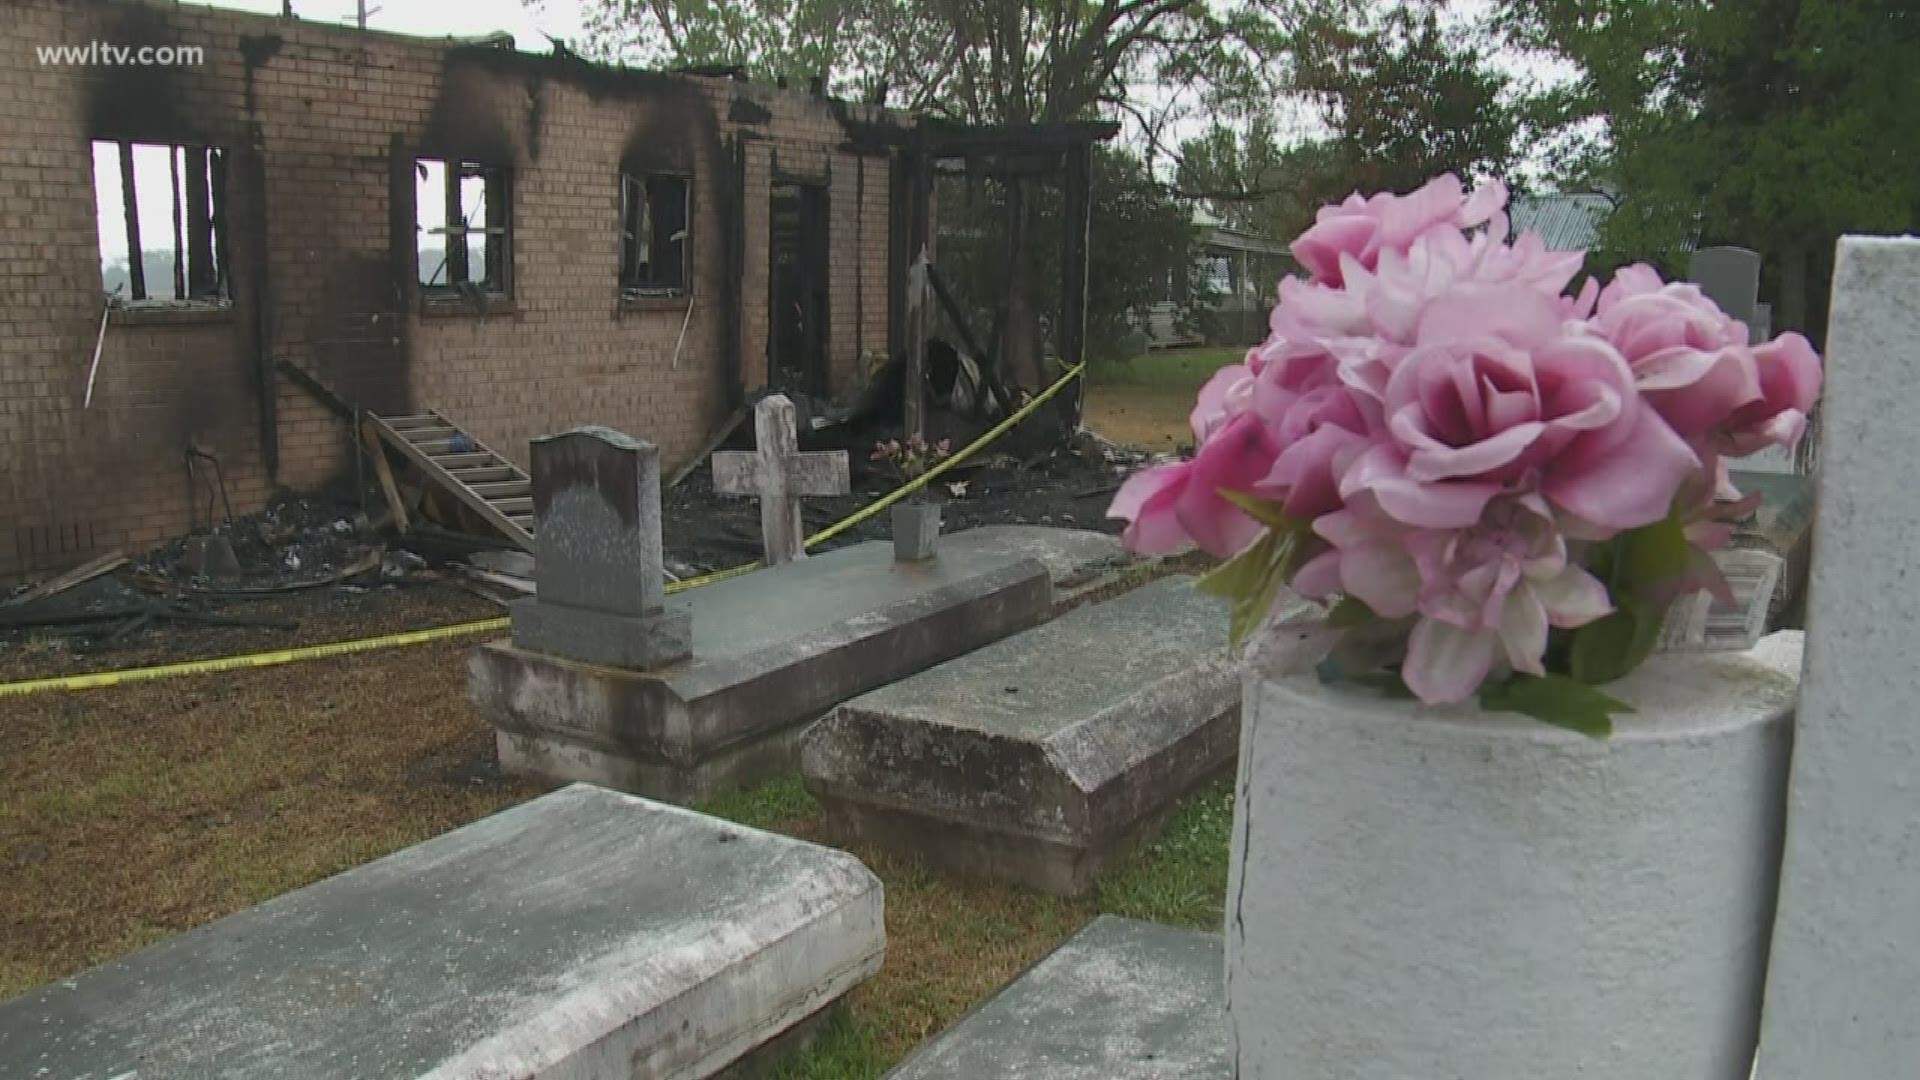 It is a time of tragedy for three churches near Opelousas, but their faith is keeping them going.